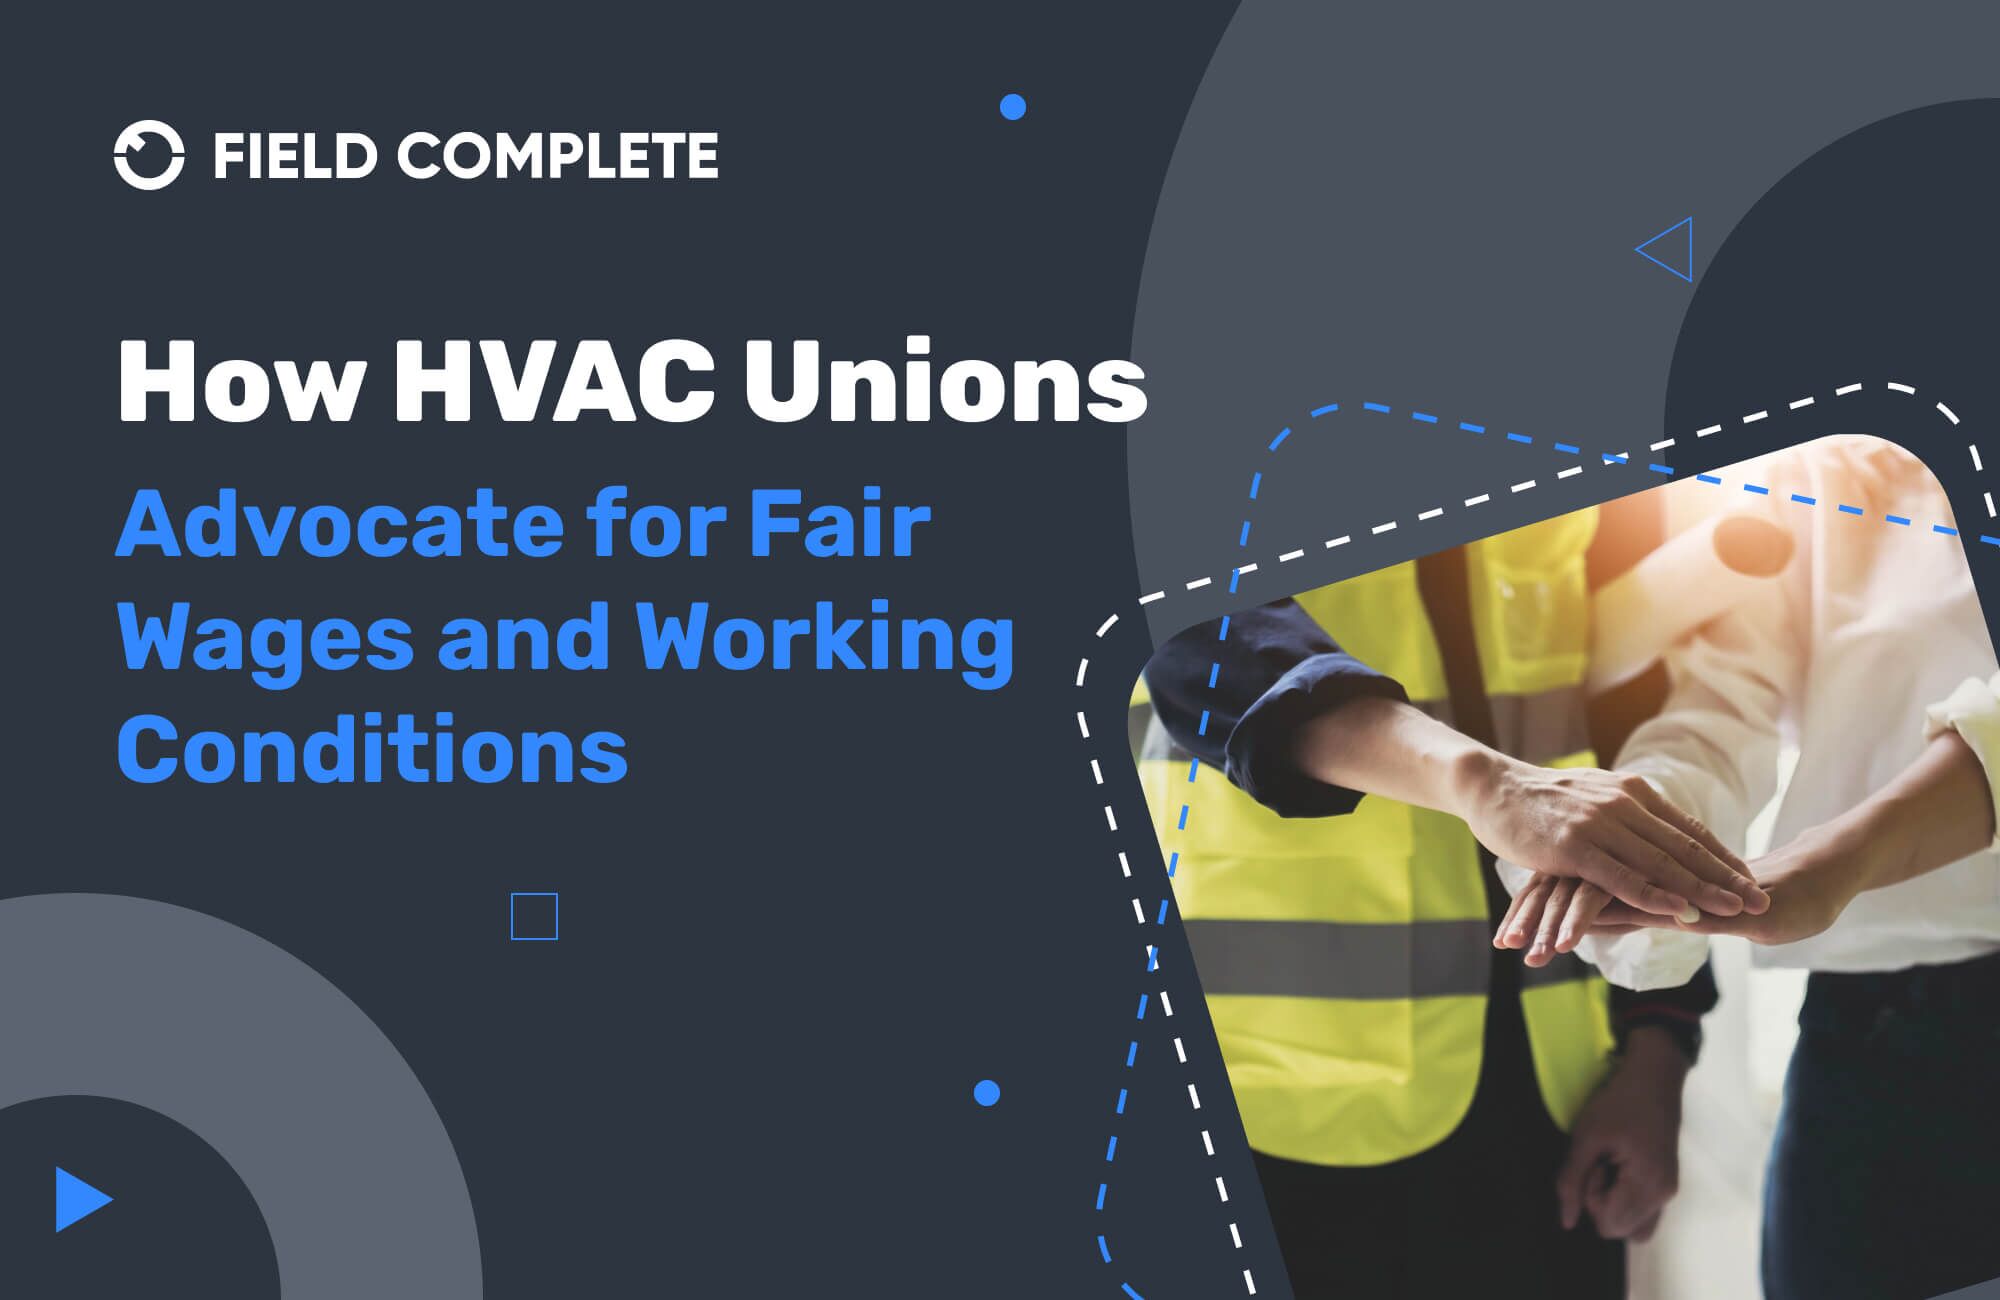 How HVAC Unions Advocate for Fair Wages and Working Conditions